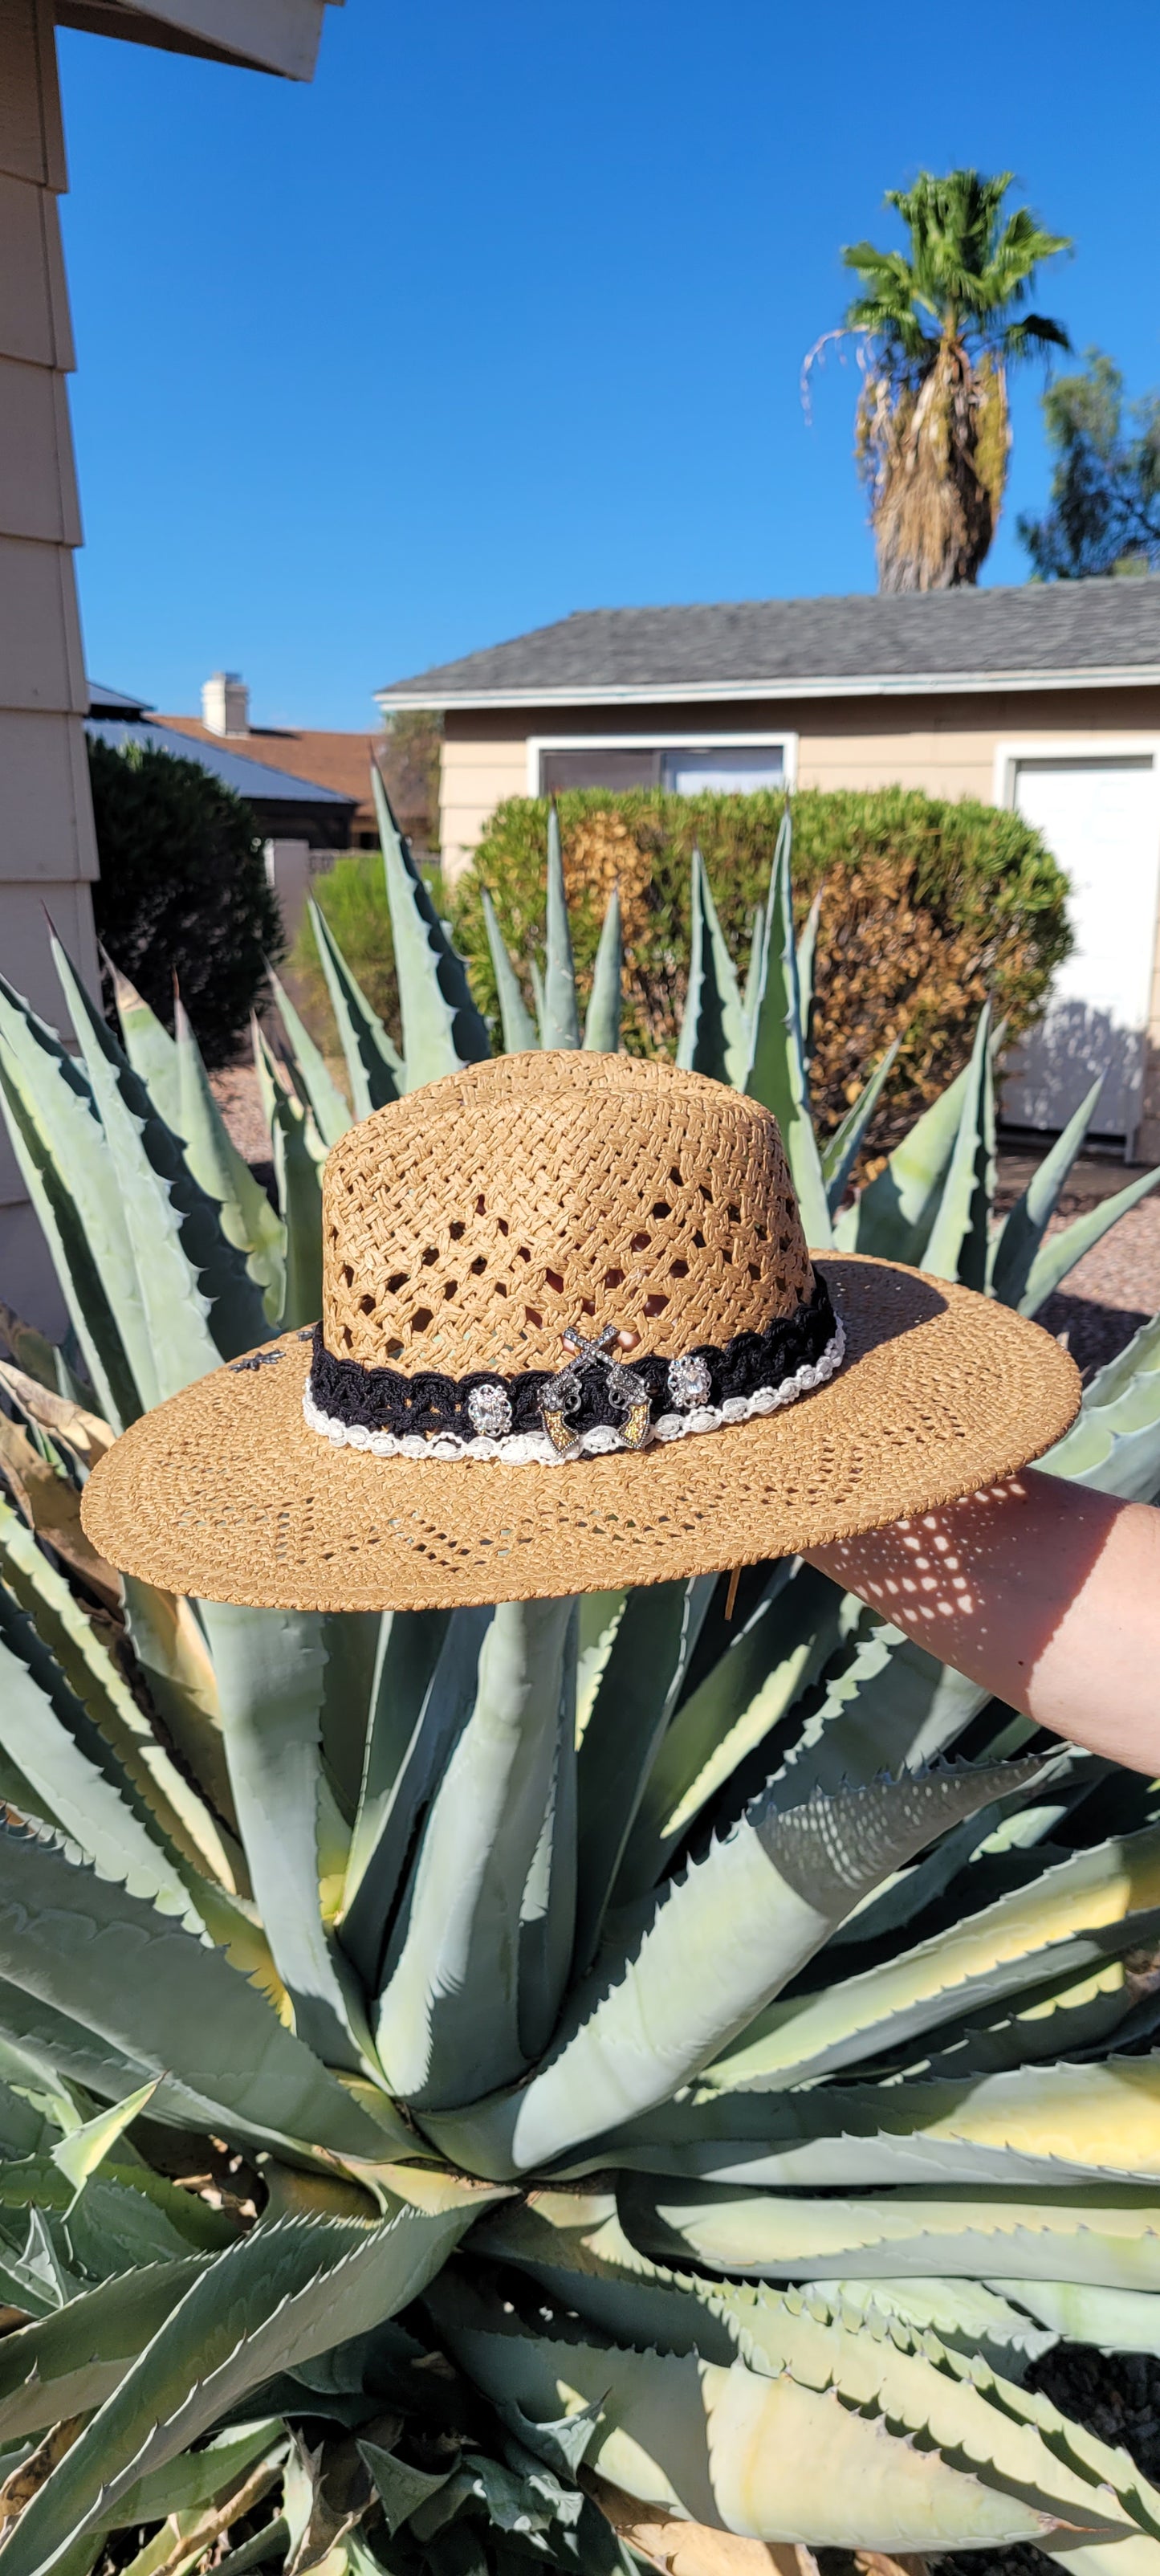 Lace ribbon, pearl ribbon, rowel (boot spur) pistol & decorative brooches Straw hat Flat brim 65% polyester and 35% cotton Ribbon drawstring for hat size adjustment Head Circumference: 24" Crown Height: 5" Brim Length: 15.75" Brim Width: 14.75" Branded & numbered inside crown Custom designed by Kayla